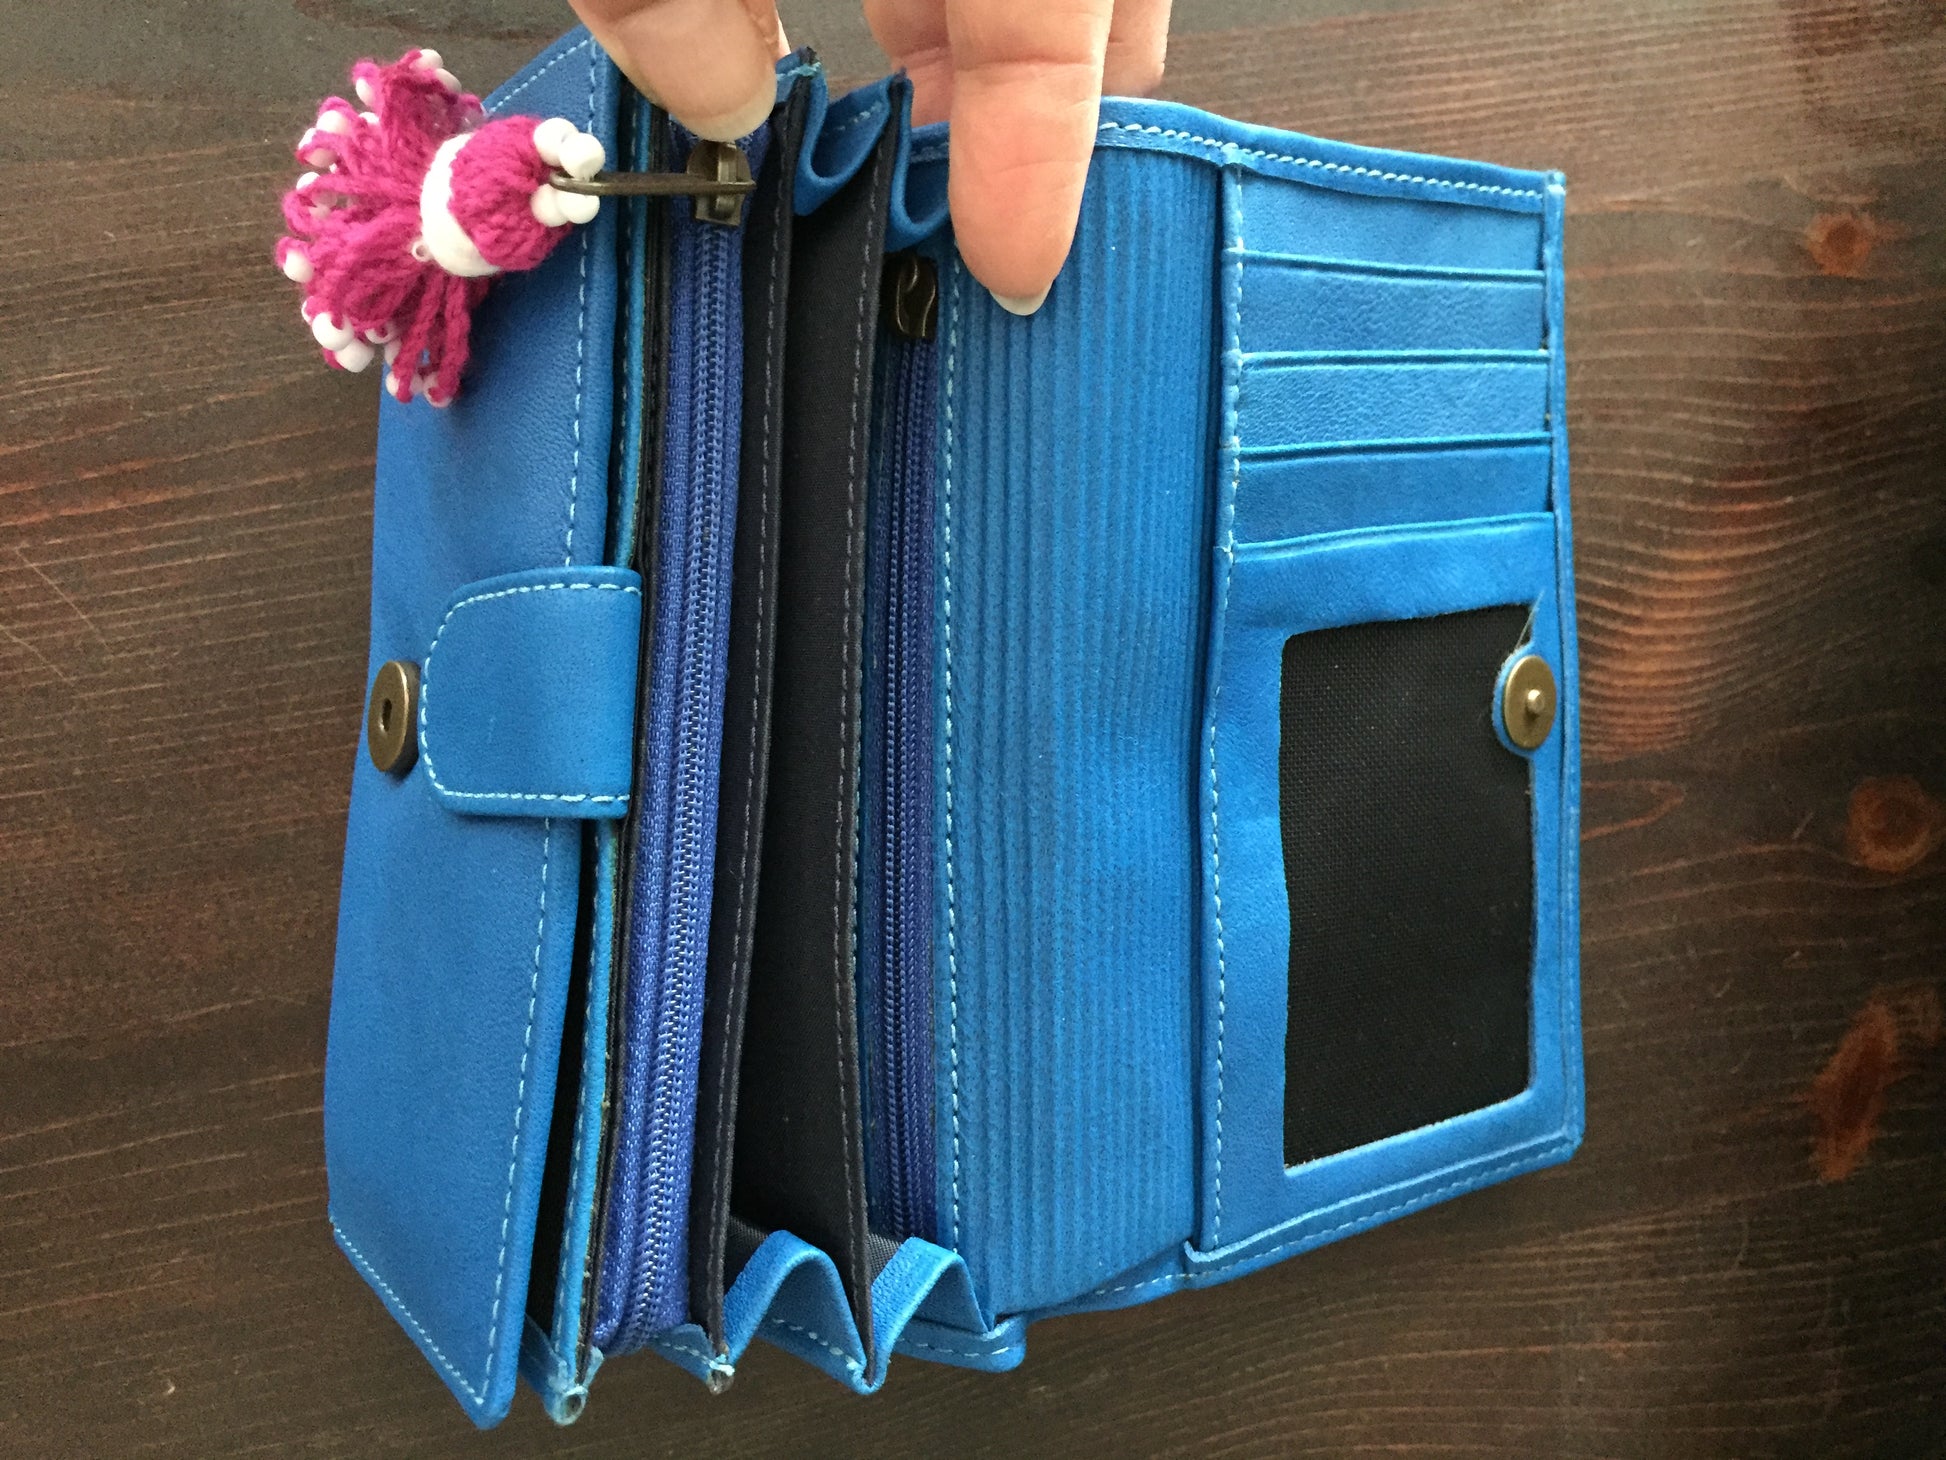 Handmade Leather Wallet with Hand Embroidery - Plumpy – Dandarah